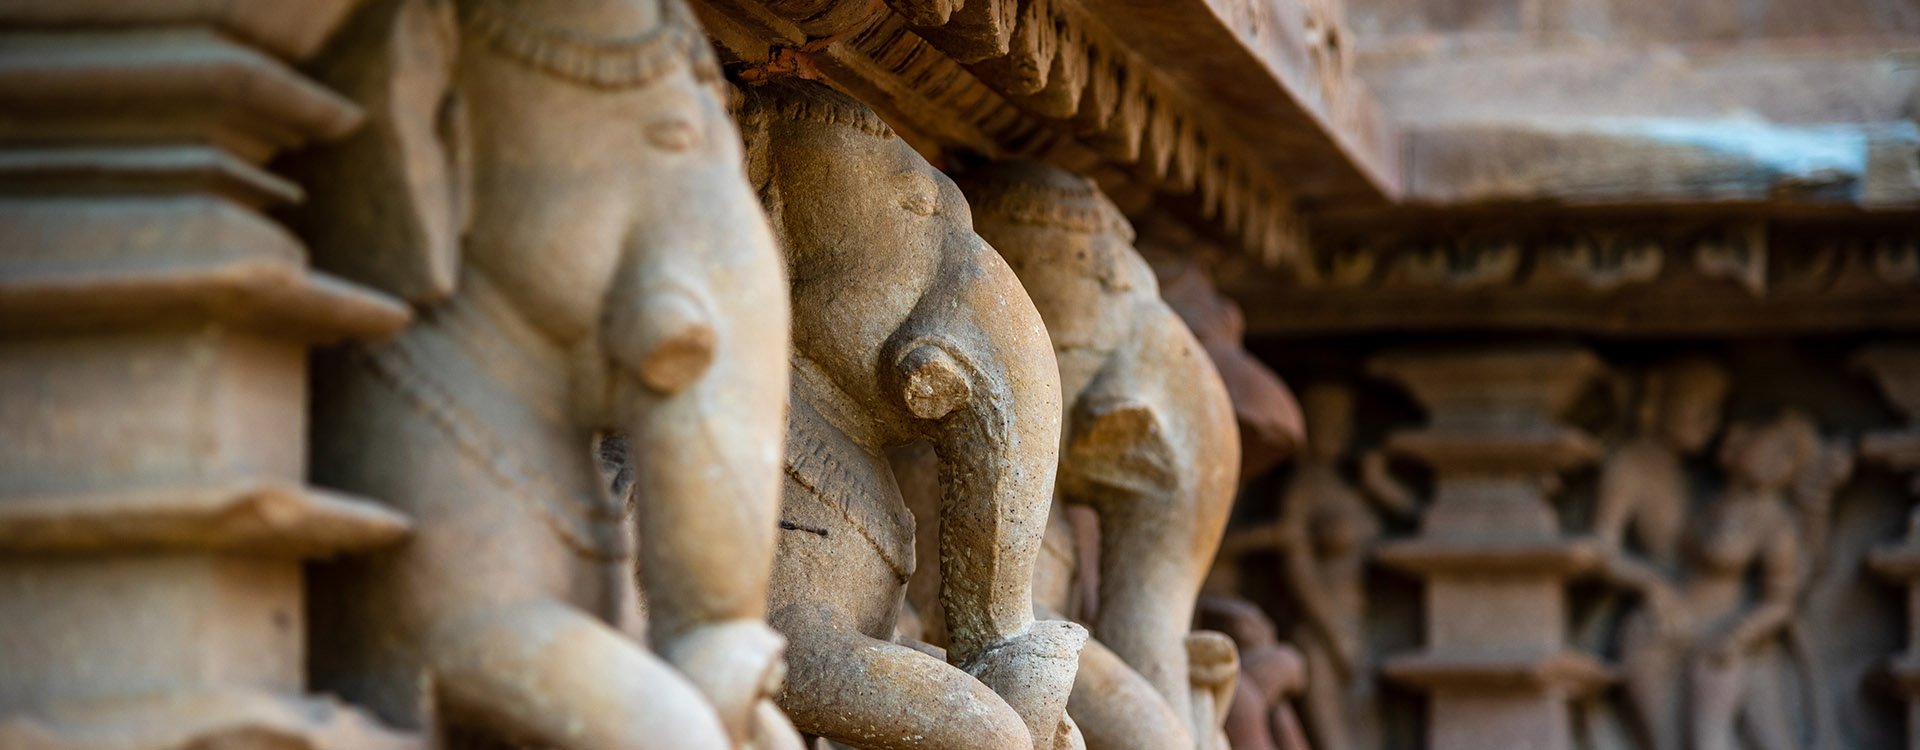 Ornated sculptures banded around the temple perimeter of Khajuraho Temple